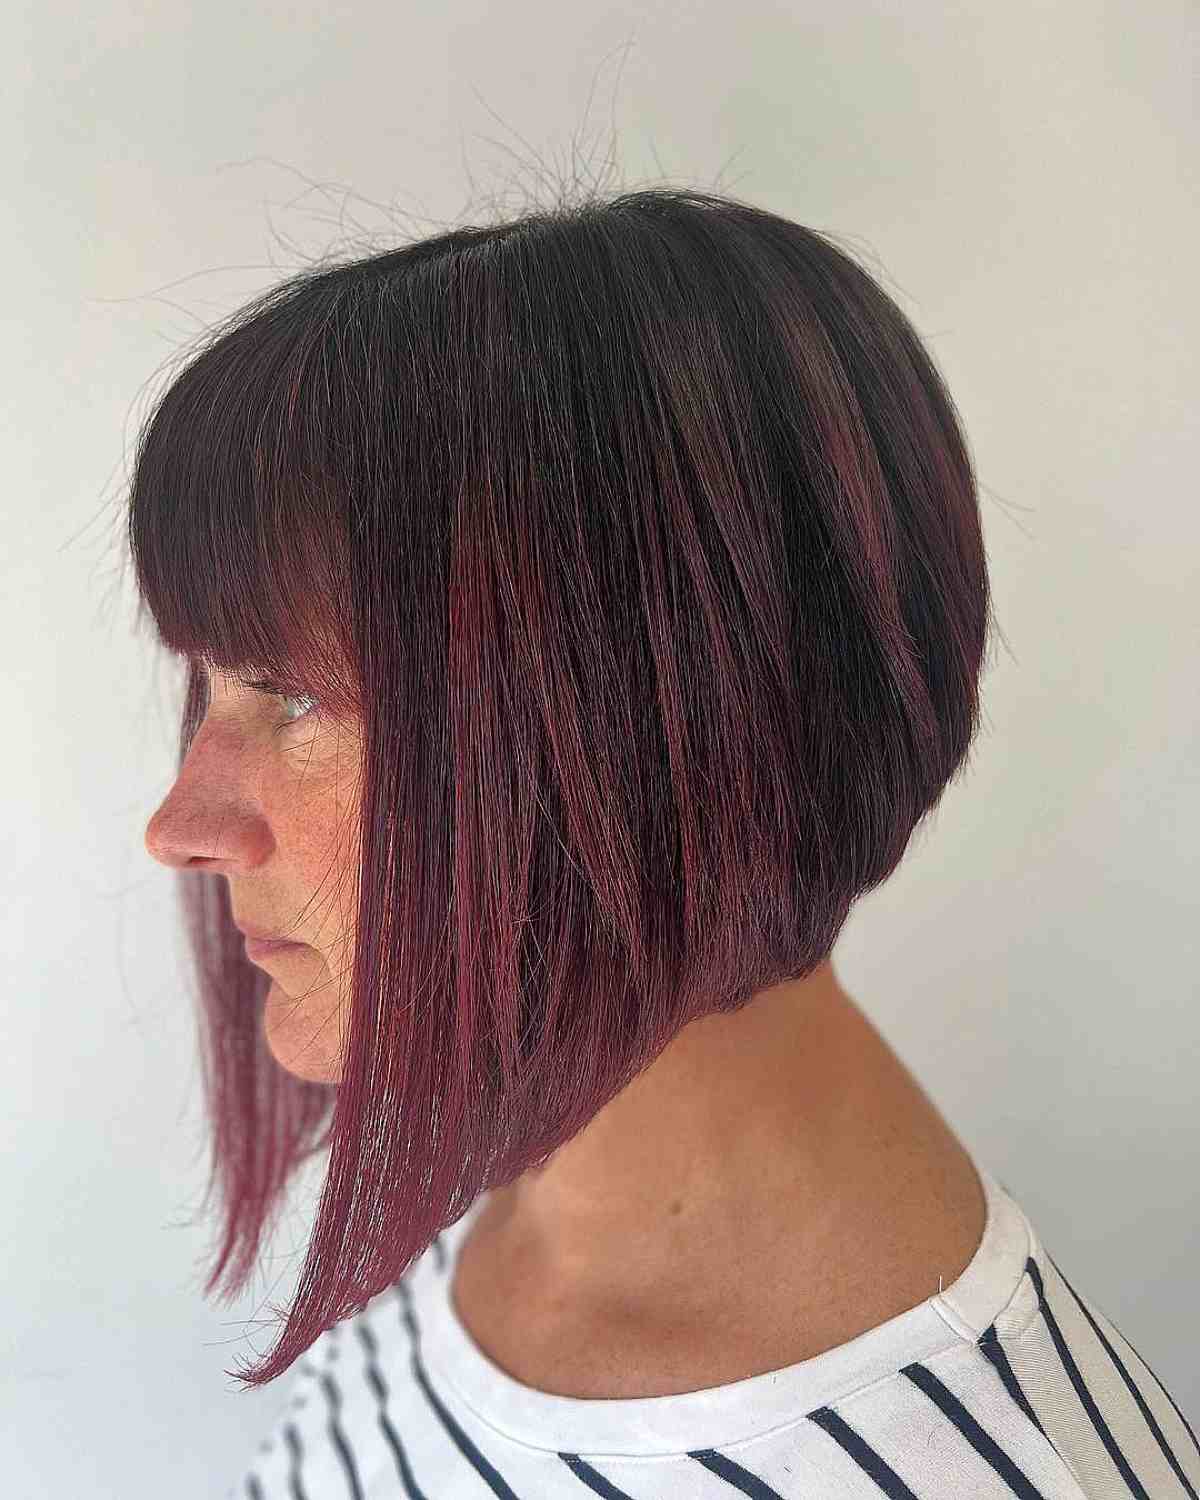 Mature Woman with A-Line Bob and Burgundy Ombre